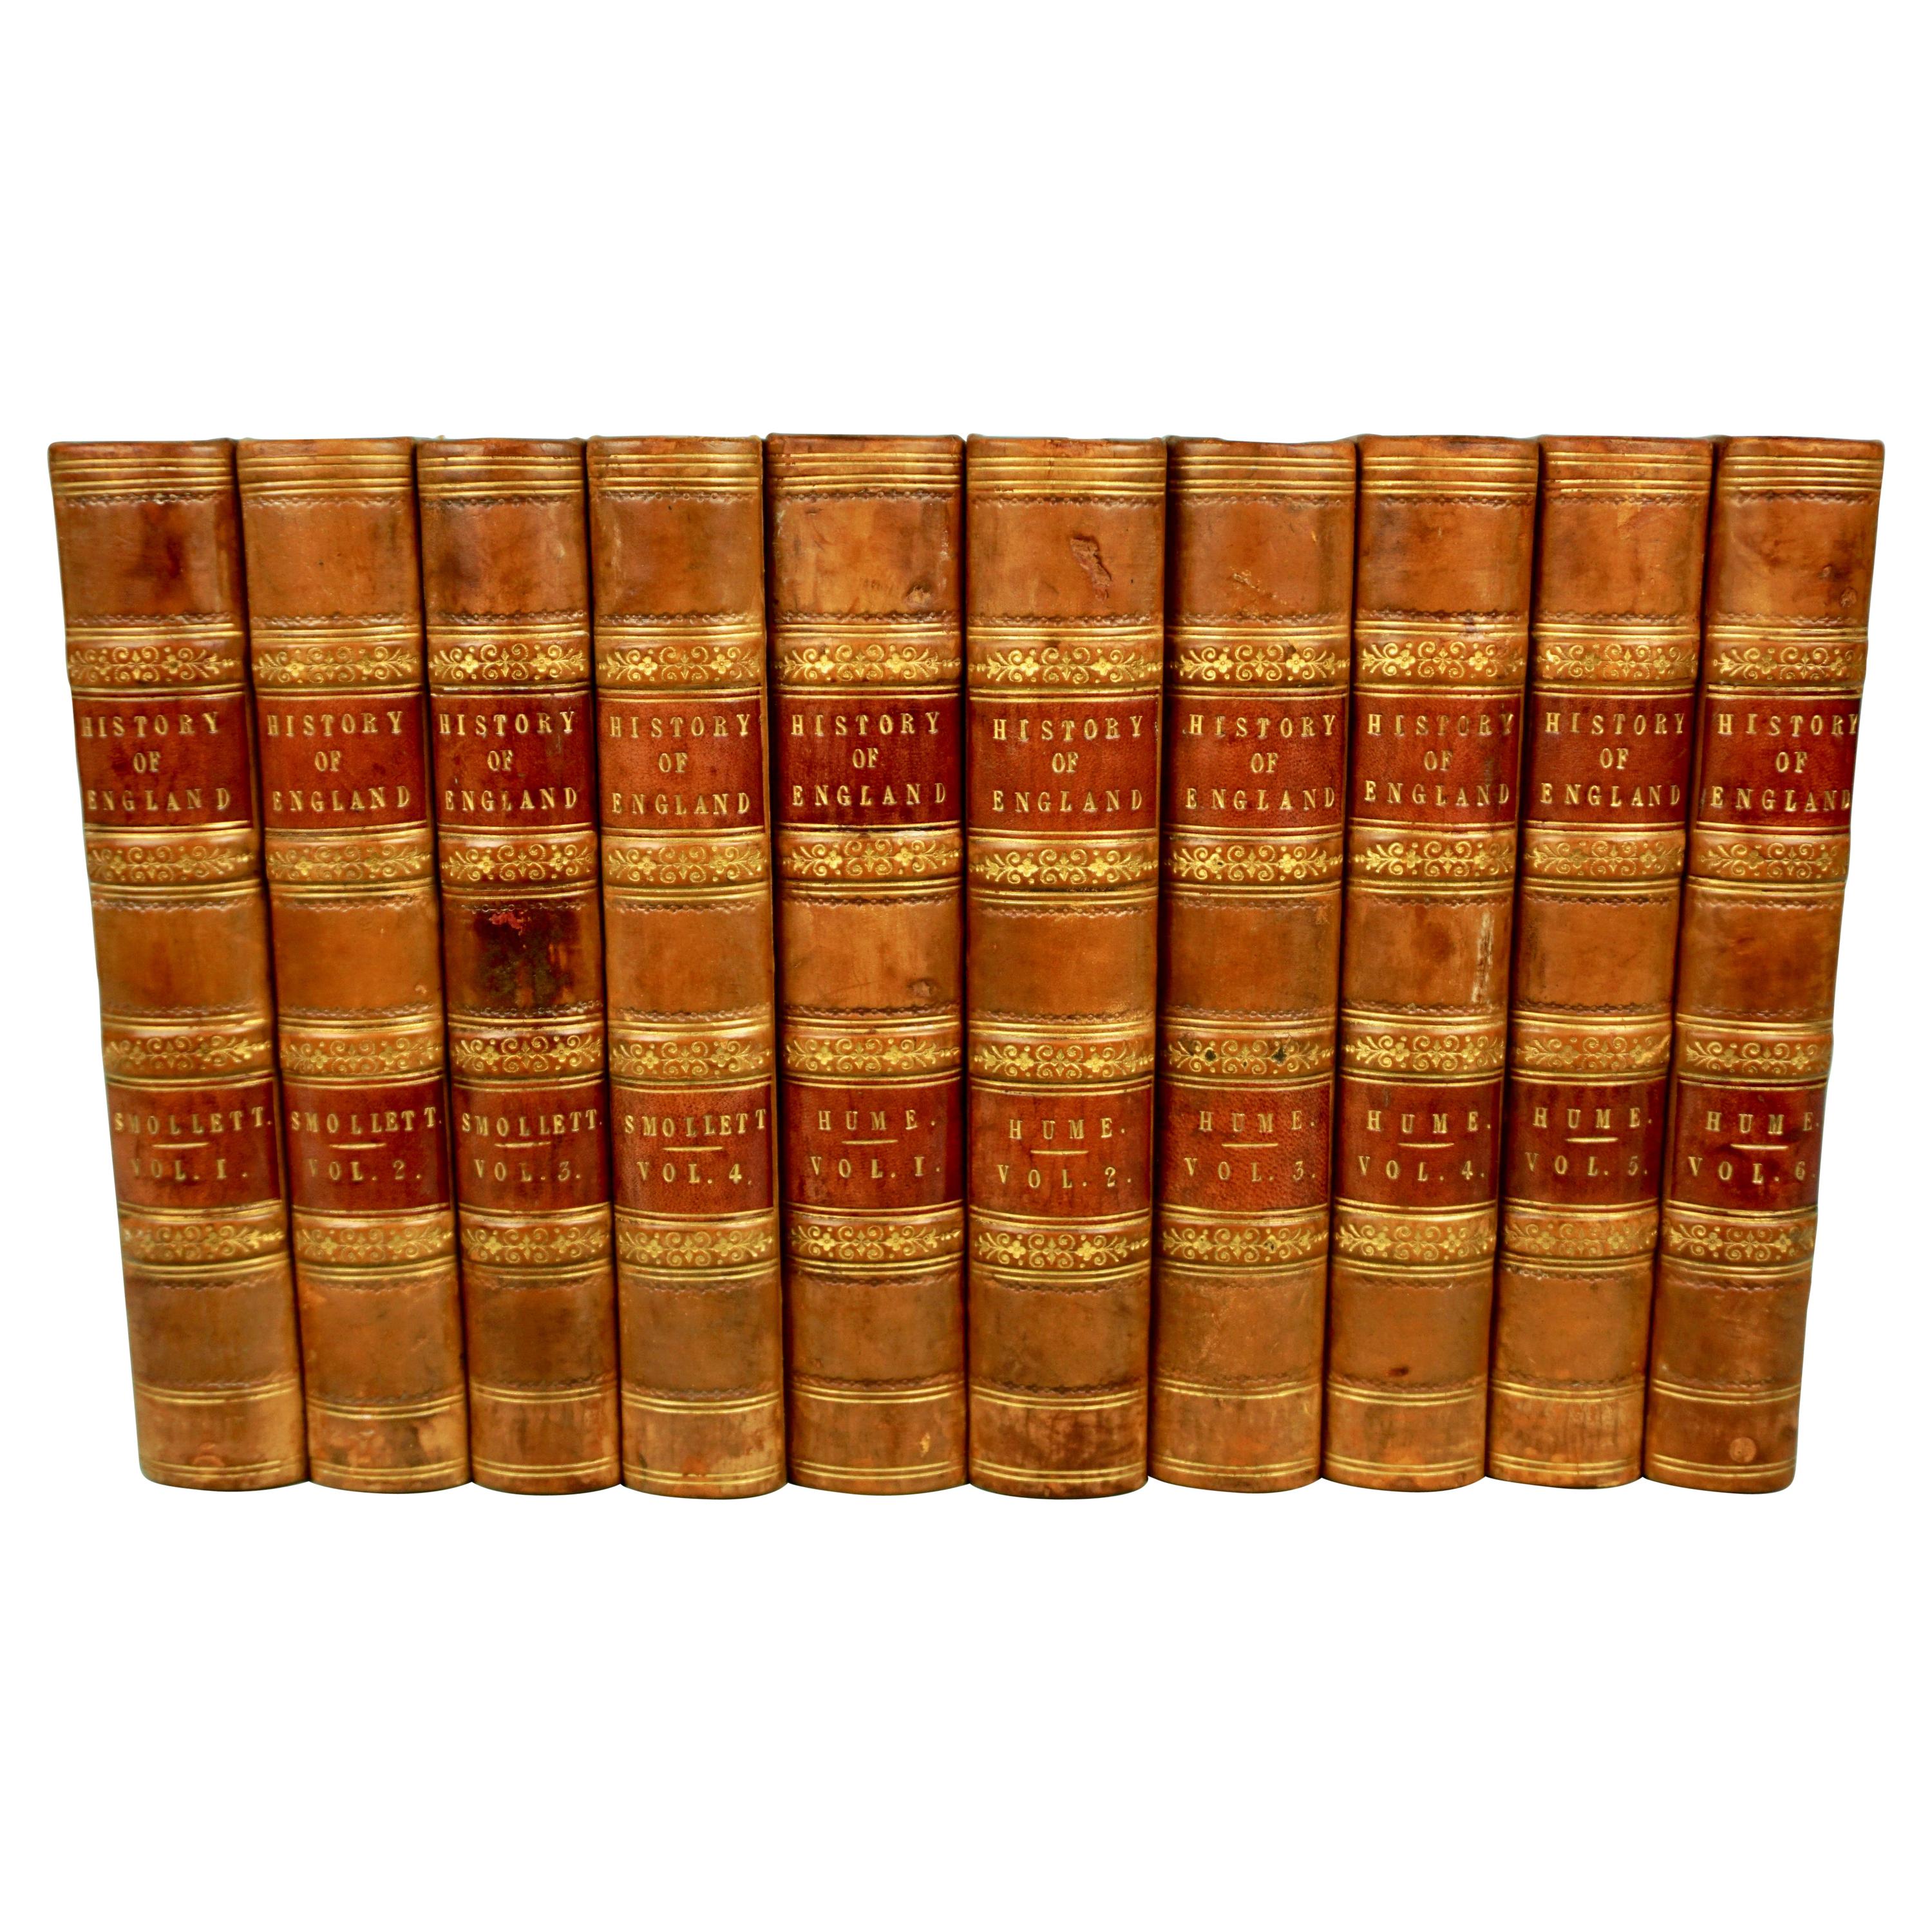 Leather Bound History of England by David Hume and Tobias Smollett in 10 Volumes